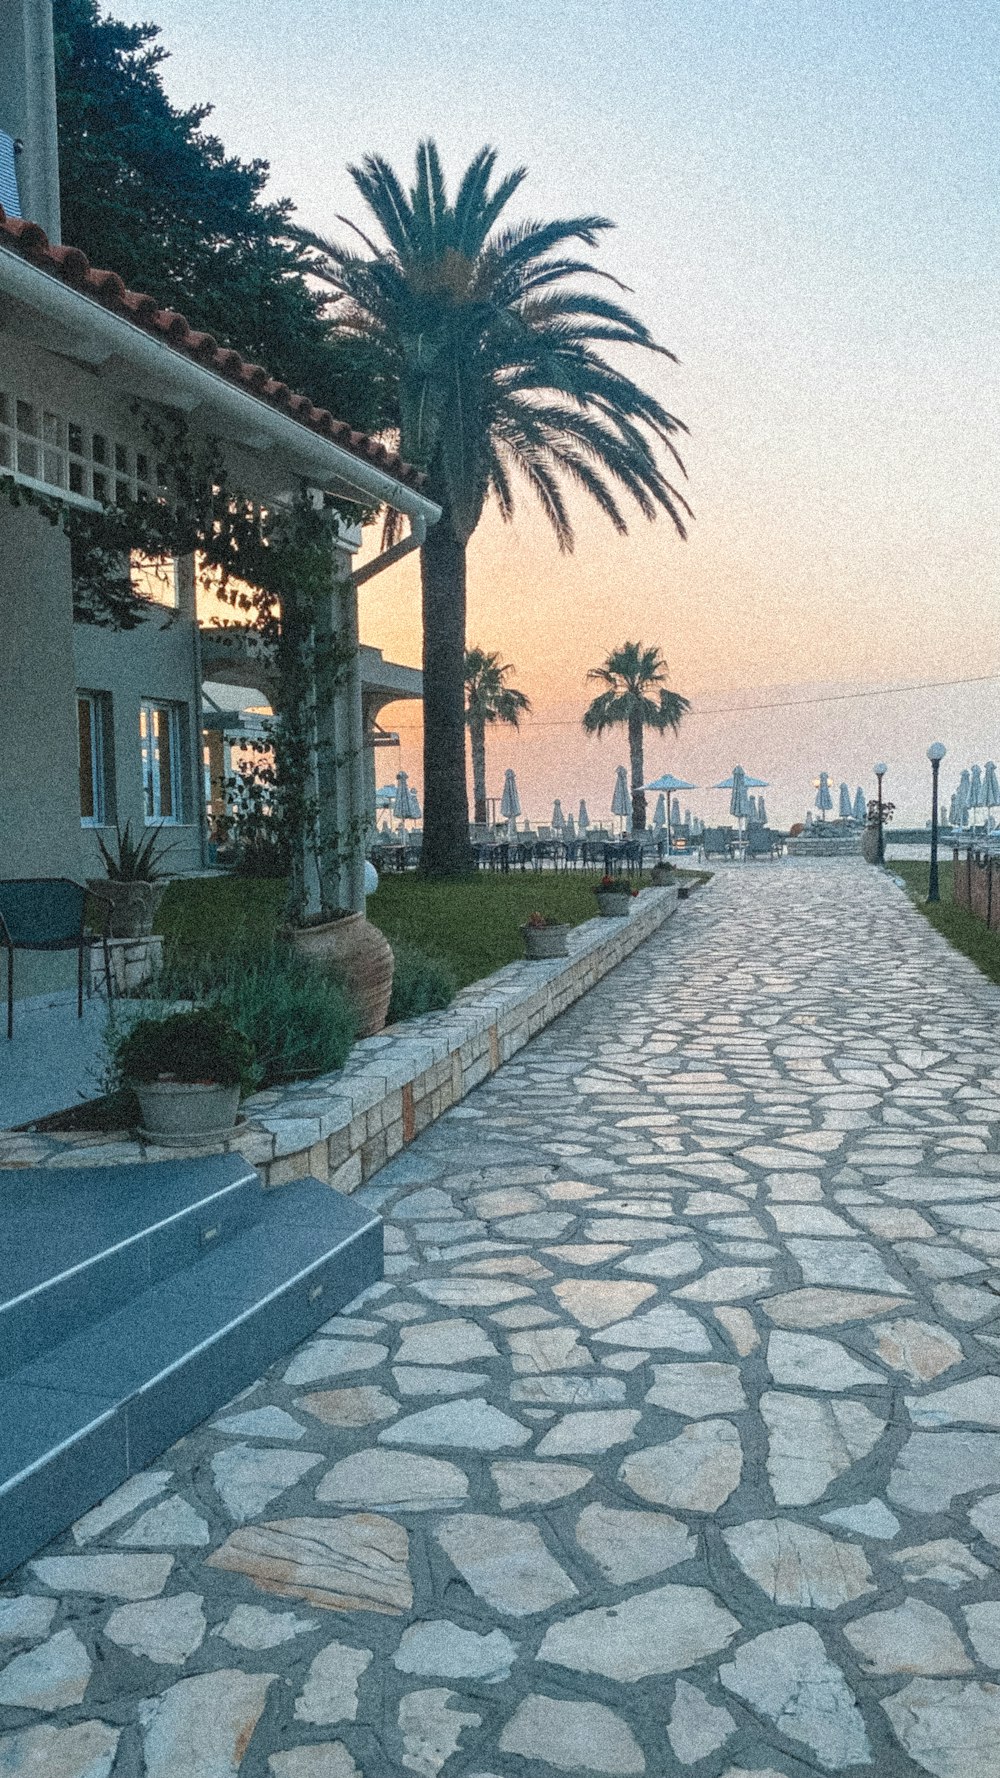 a stone walkway with palm trees and buildings in the background